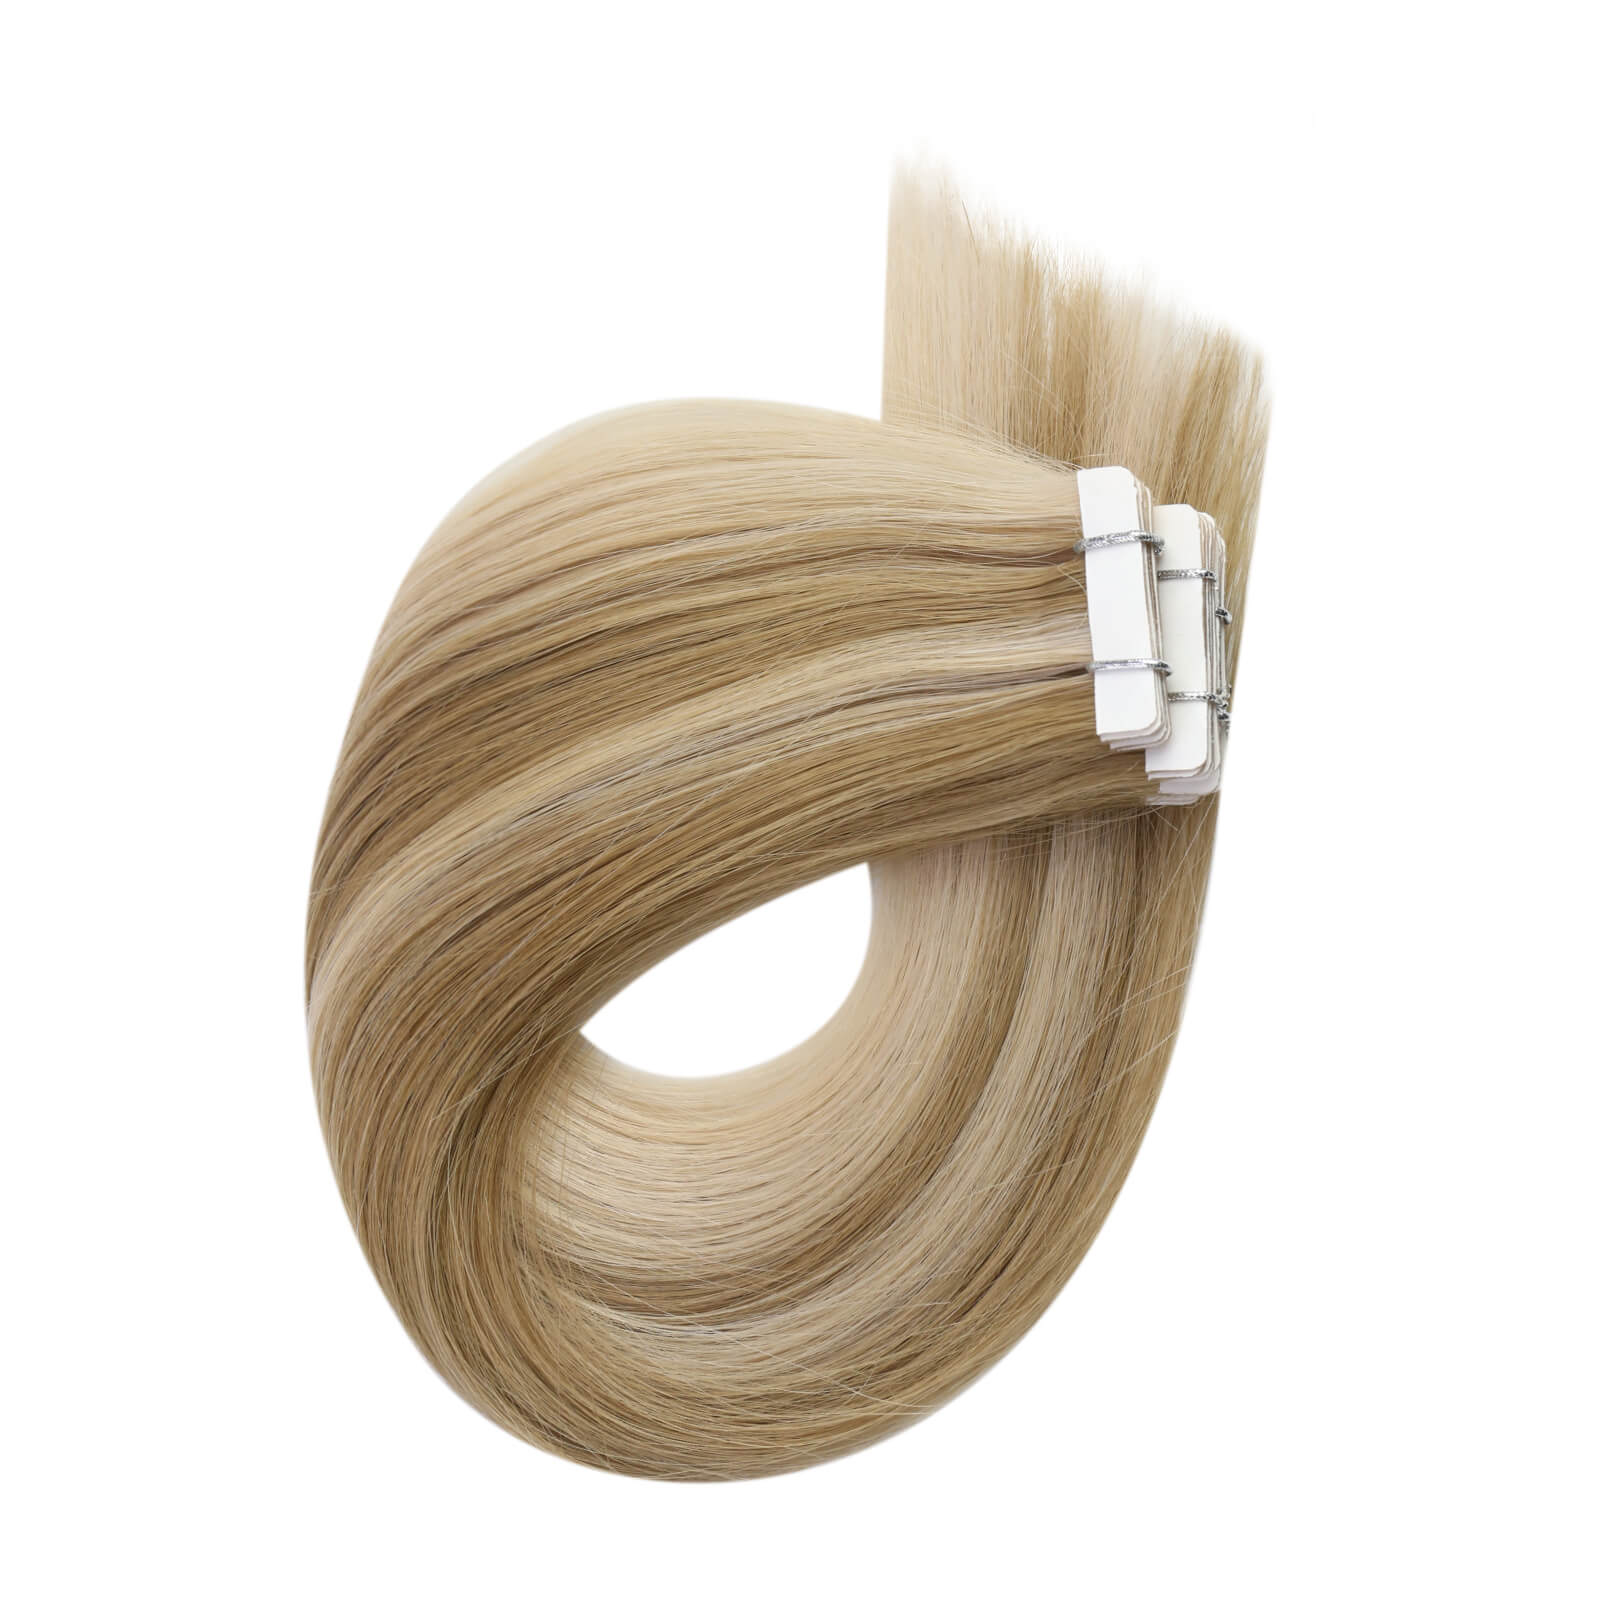 sunny hair extensions,tape hair extensions,human hair extensions, 18 inch hair extensions,best hair extensions,blonde hair extensions,for thin hair,for short hair extensions,injection taoe,seamless tape hair,